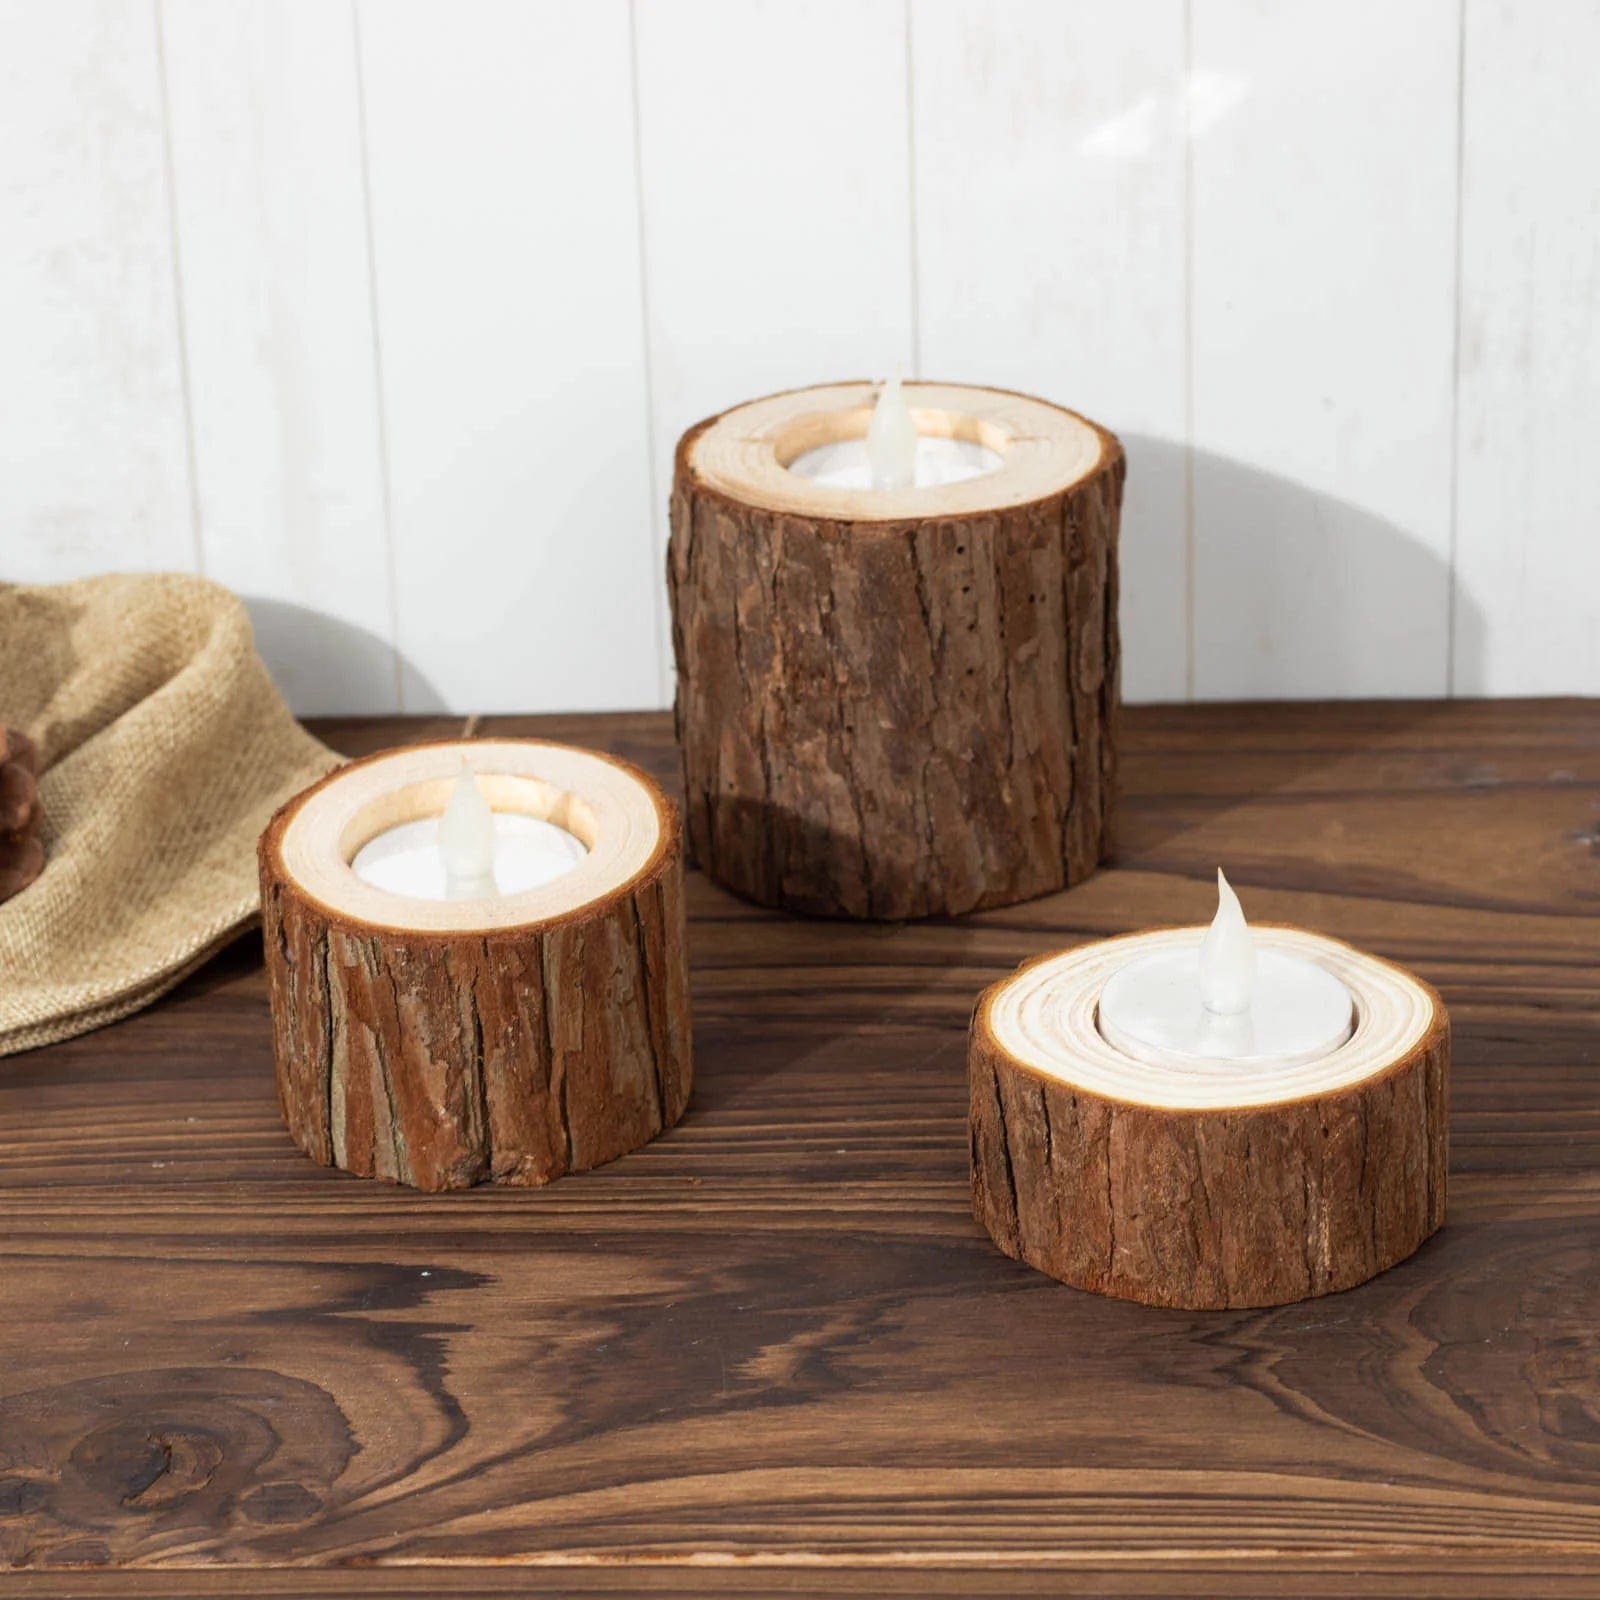 3 Assorted Round Natural Wood Slice Tea Light Candle Holders